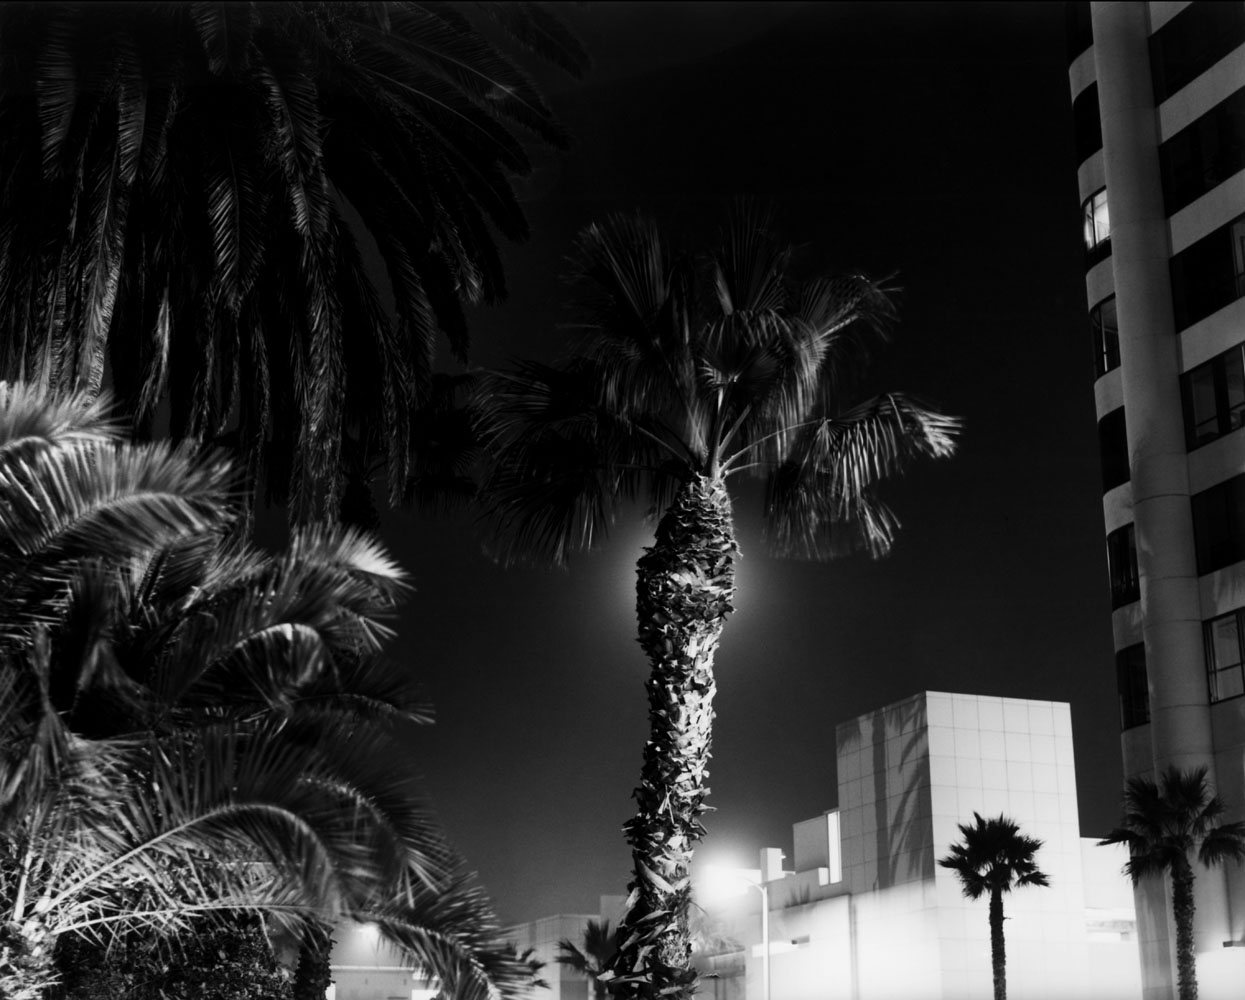 USA. Los Angeles, California. 2008. Wilshire Blvd.Contact email:New York : photography@magnumphotos.comParis : magnum@magnumphotos.frLondon : magnum@magnumphotos.co.ukTokyo : tokyo@magnumphotos.co.jpContact phones:New York : +1 212 929 6000Paris: + 33 1 53 42 50 00London: + 44 20 7490 1771Tokyo: + 81 3 3219 0771Image URL:http://www.magnumphotos.com/Archive/C.aspx?VP3=ViewBox_VPage&IID=2K7O3RT0V246&CT=Image&IT=ZoomImage01_VForm